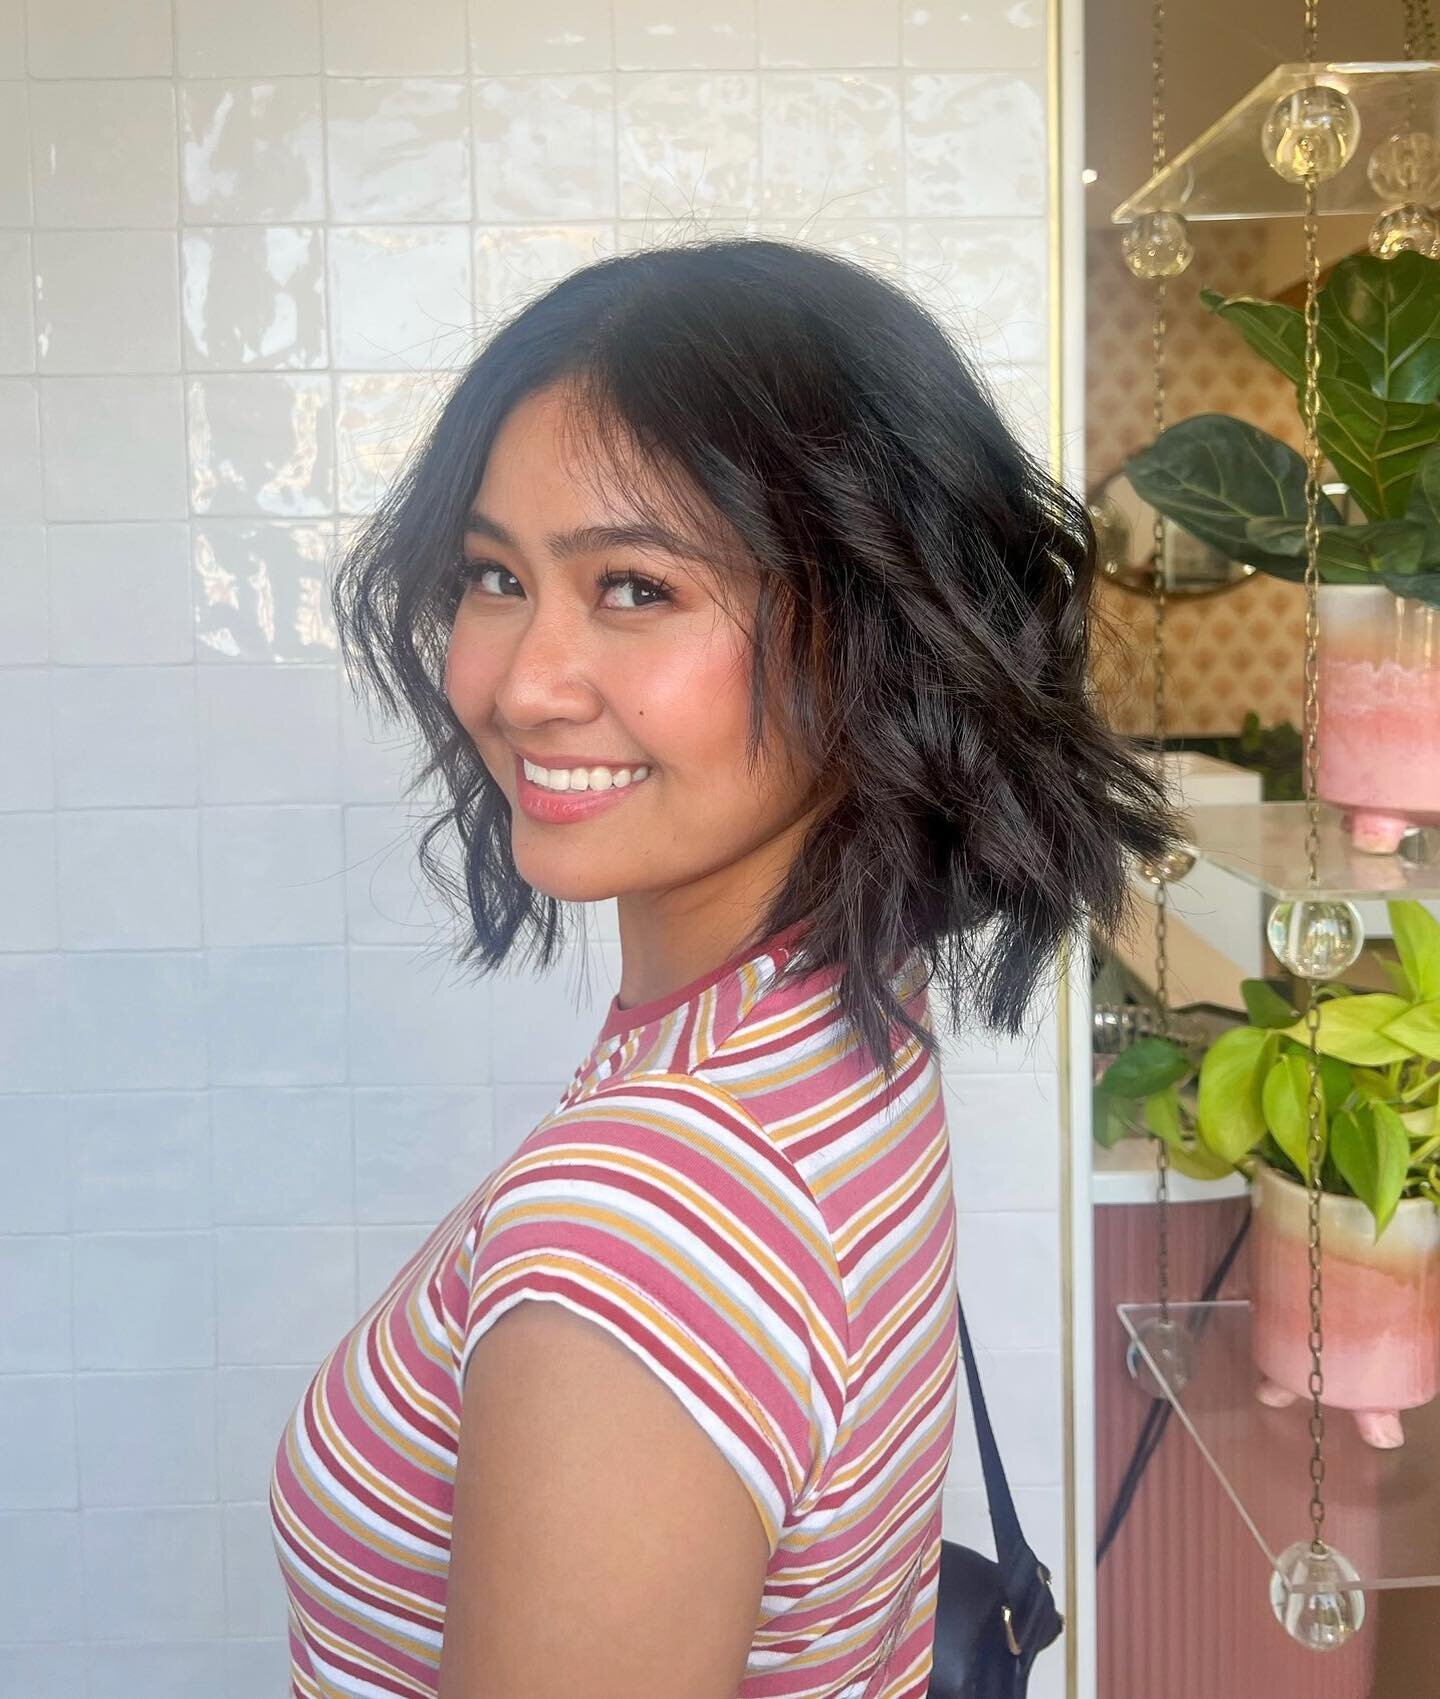 Chopped off 7 inches of hair for this beauty 🥰 she came in and wanted this look! nothing like a quick impulsive decision 💁🏻&zwj;♀️

Hair by @avanosspro 

#shorthaircuts #bobhairstyle #freshnewhair #naturalbeauty #impulsivehaircut #hairchop #oceans